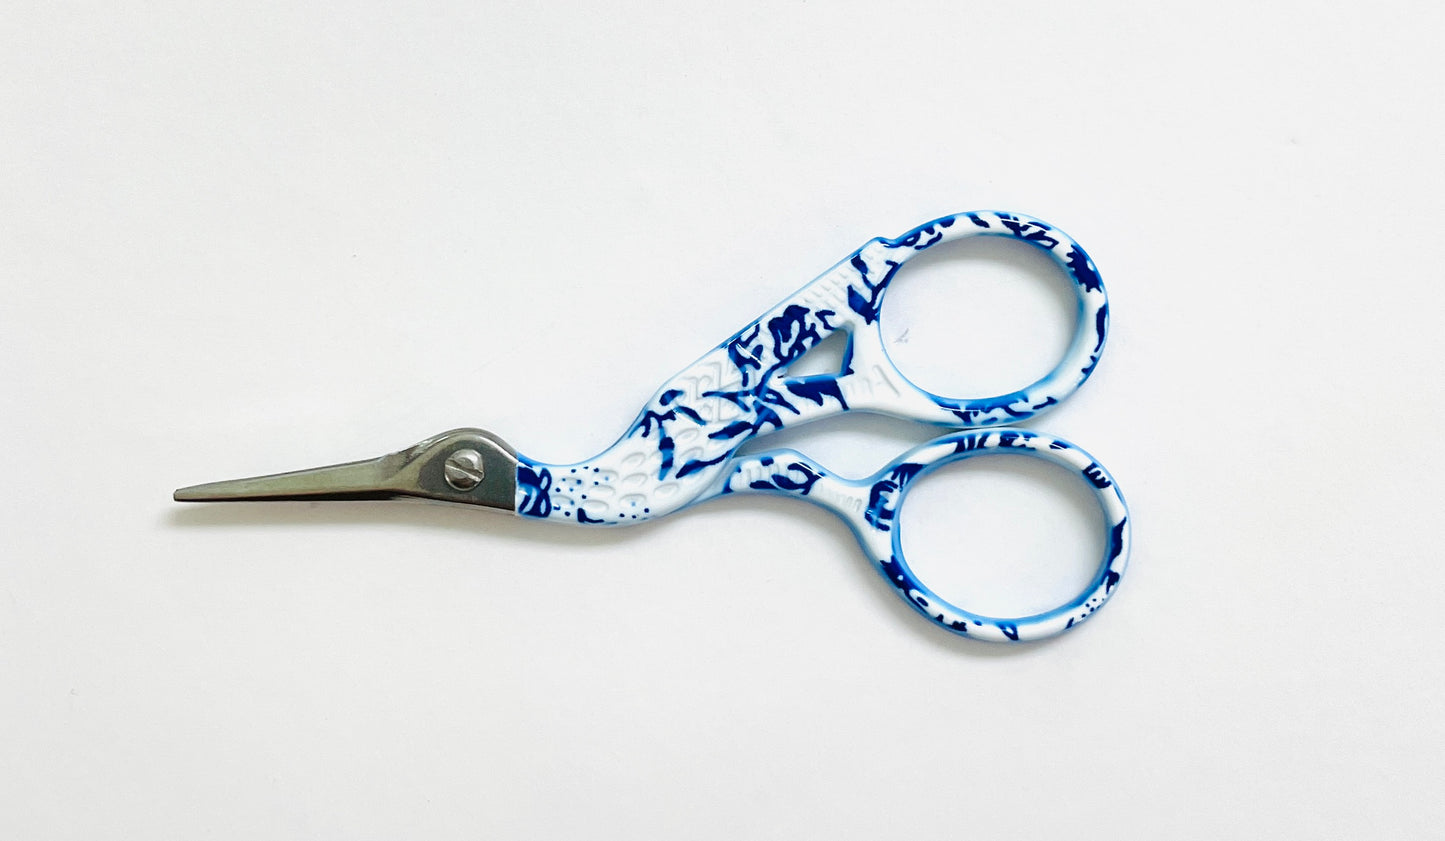 Embroidery Scissors Blue and White